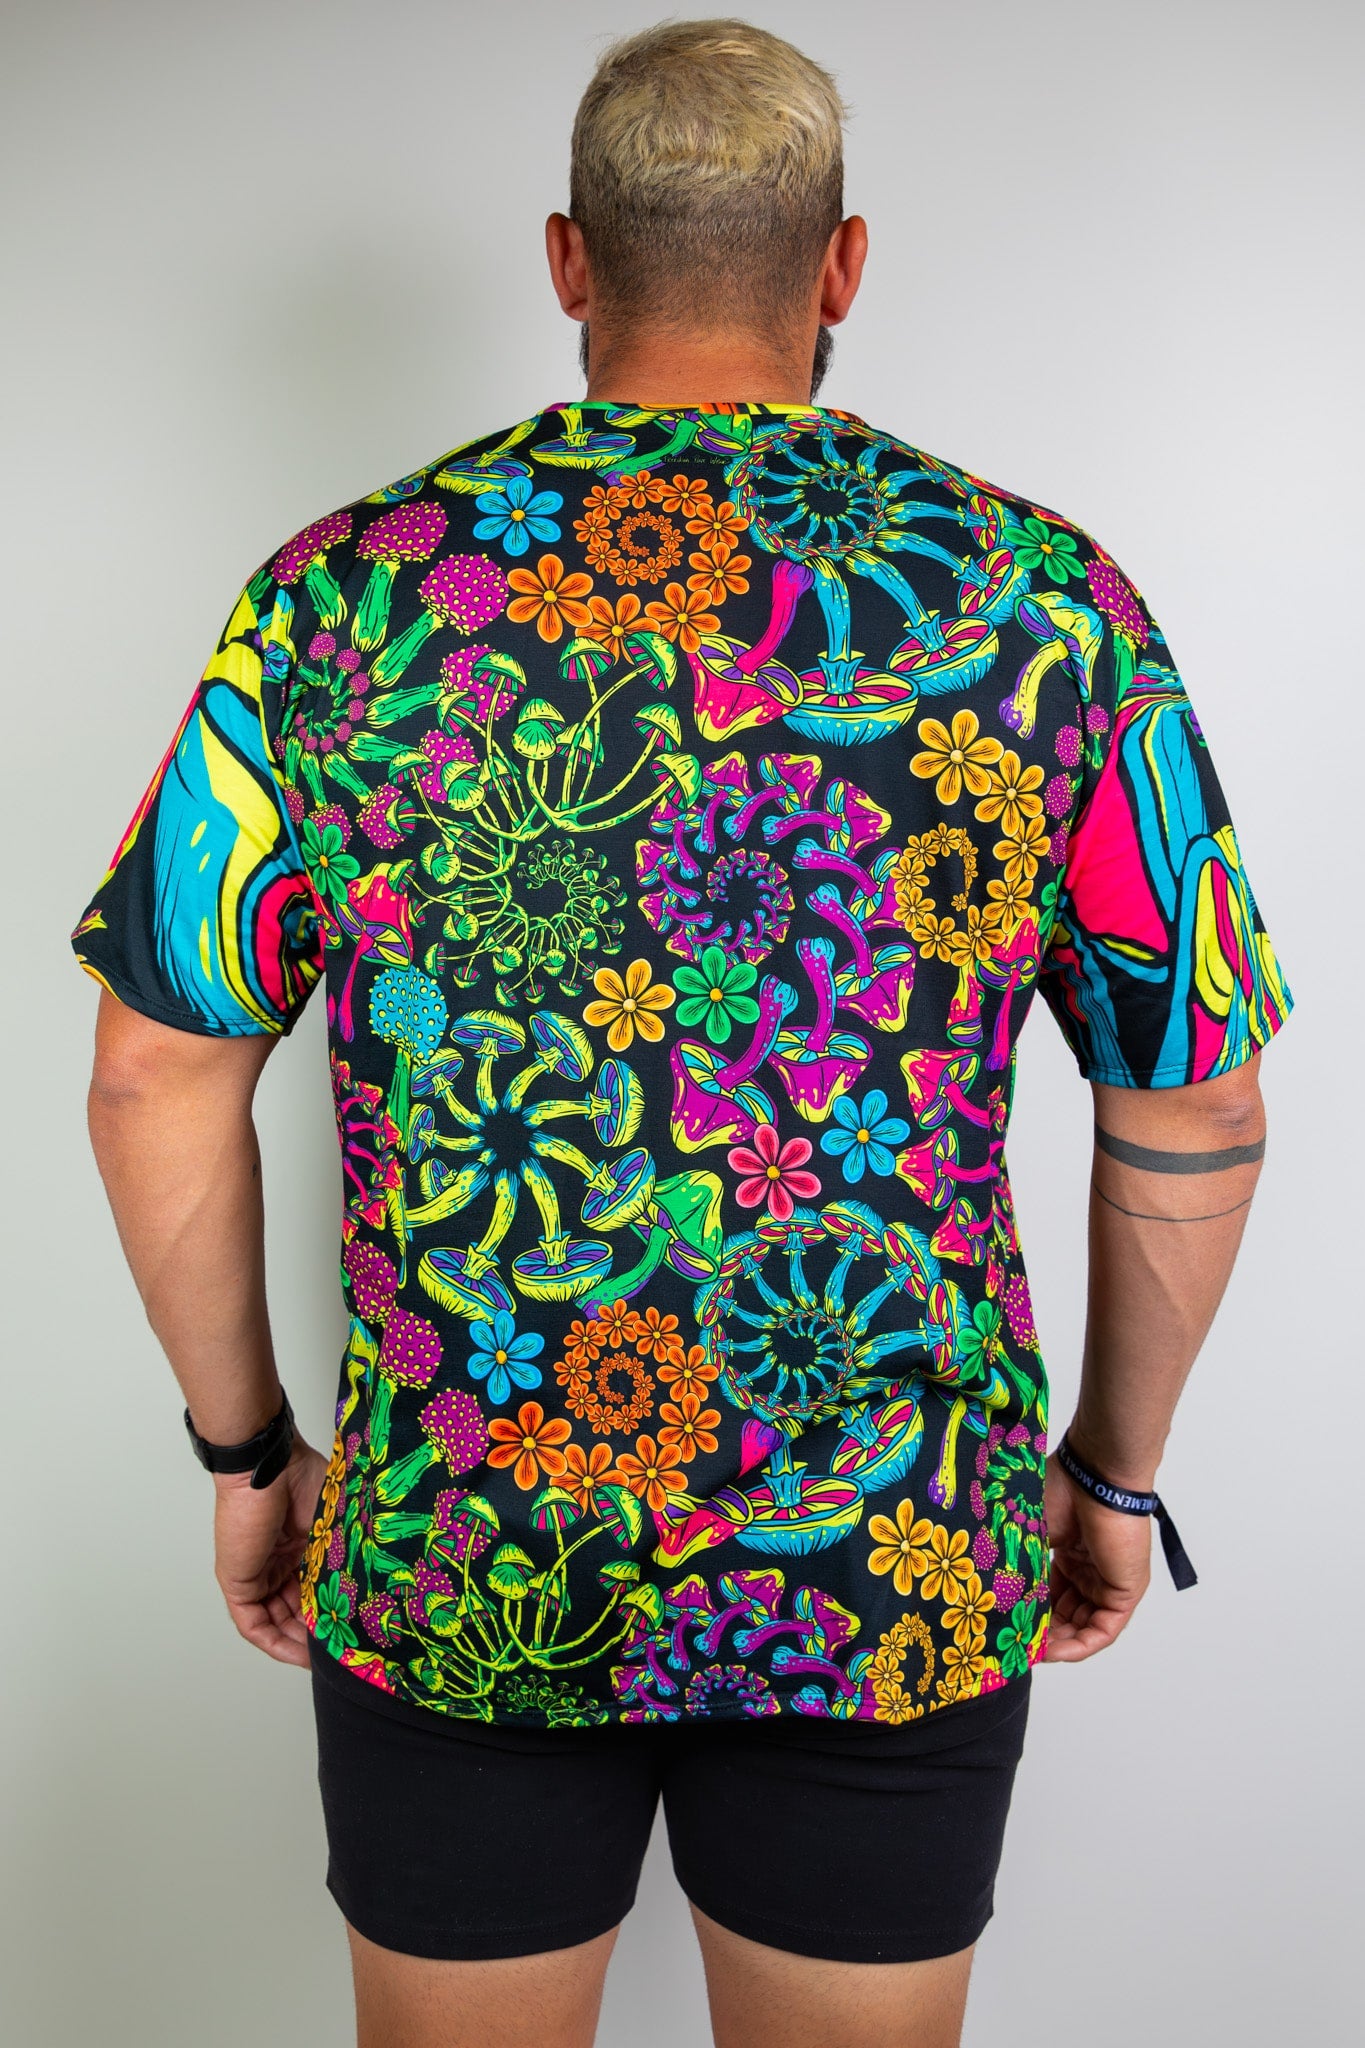  Model showing back view of a vibrant, psychedelic floral t-shirt with bold patterns, ideal for raves. Freedom Rave Wear offers unique fashion.